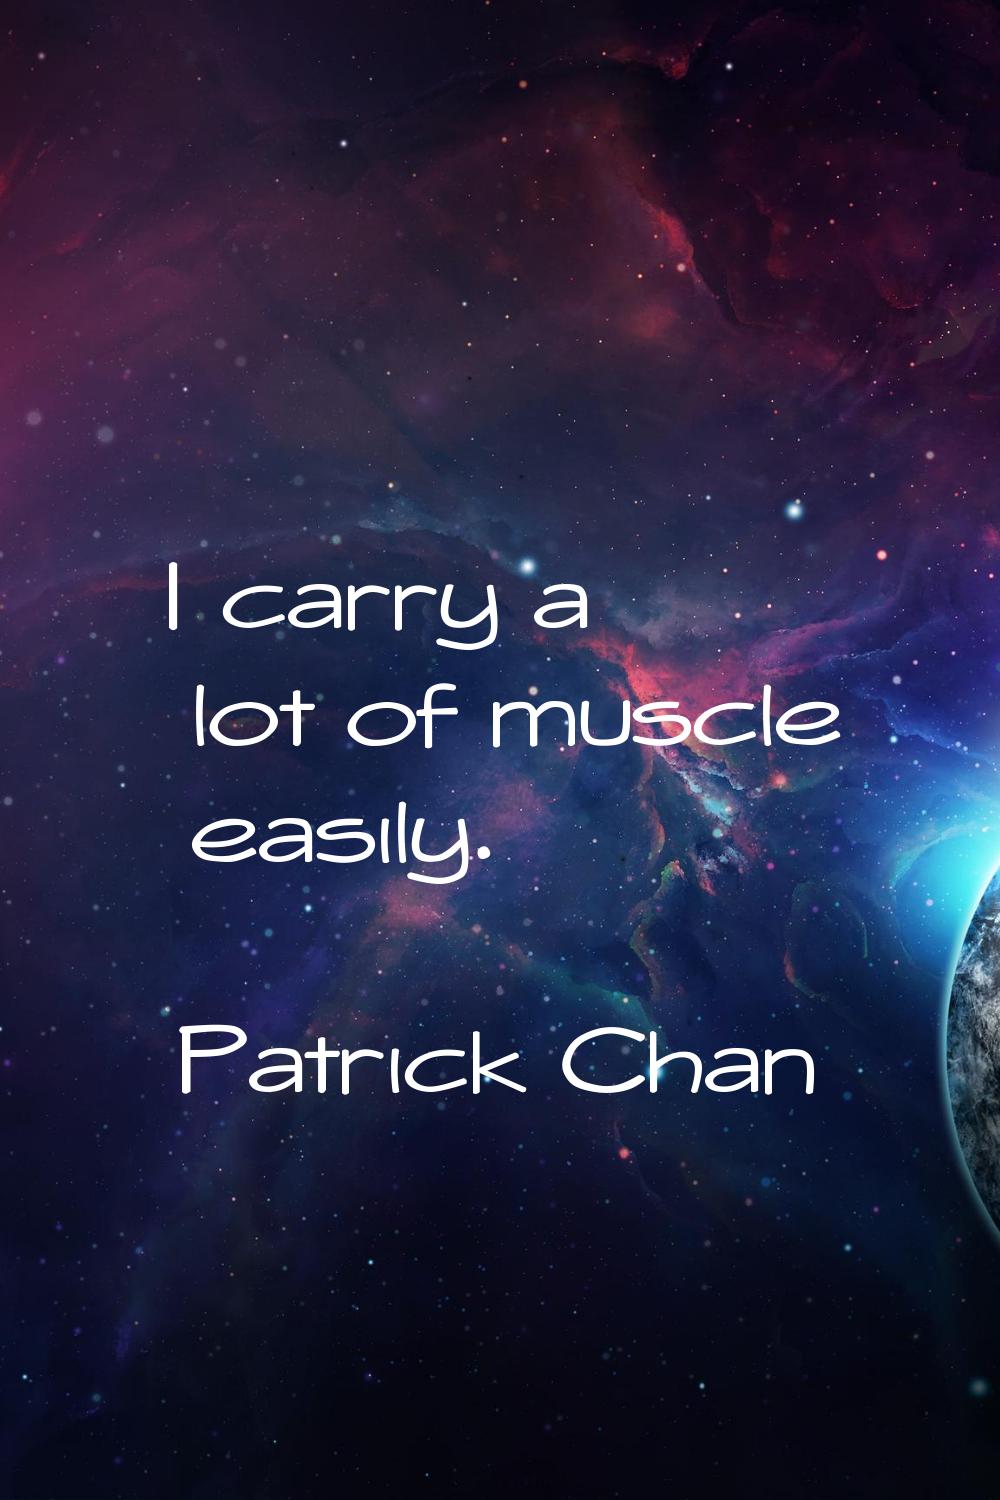 I carry a lot of muscle easily.